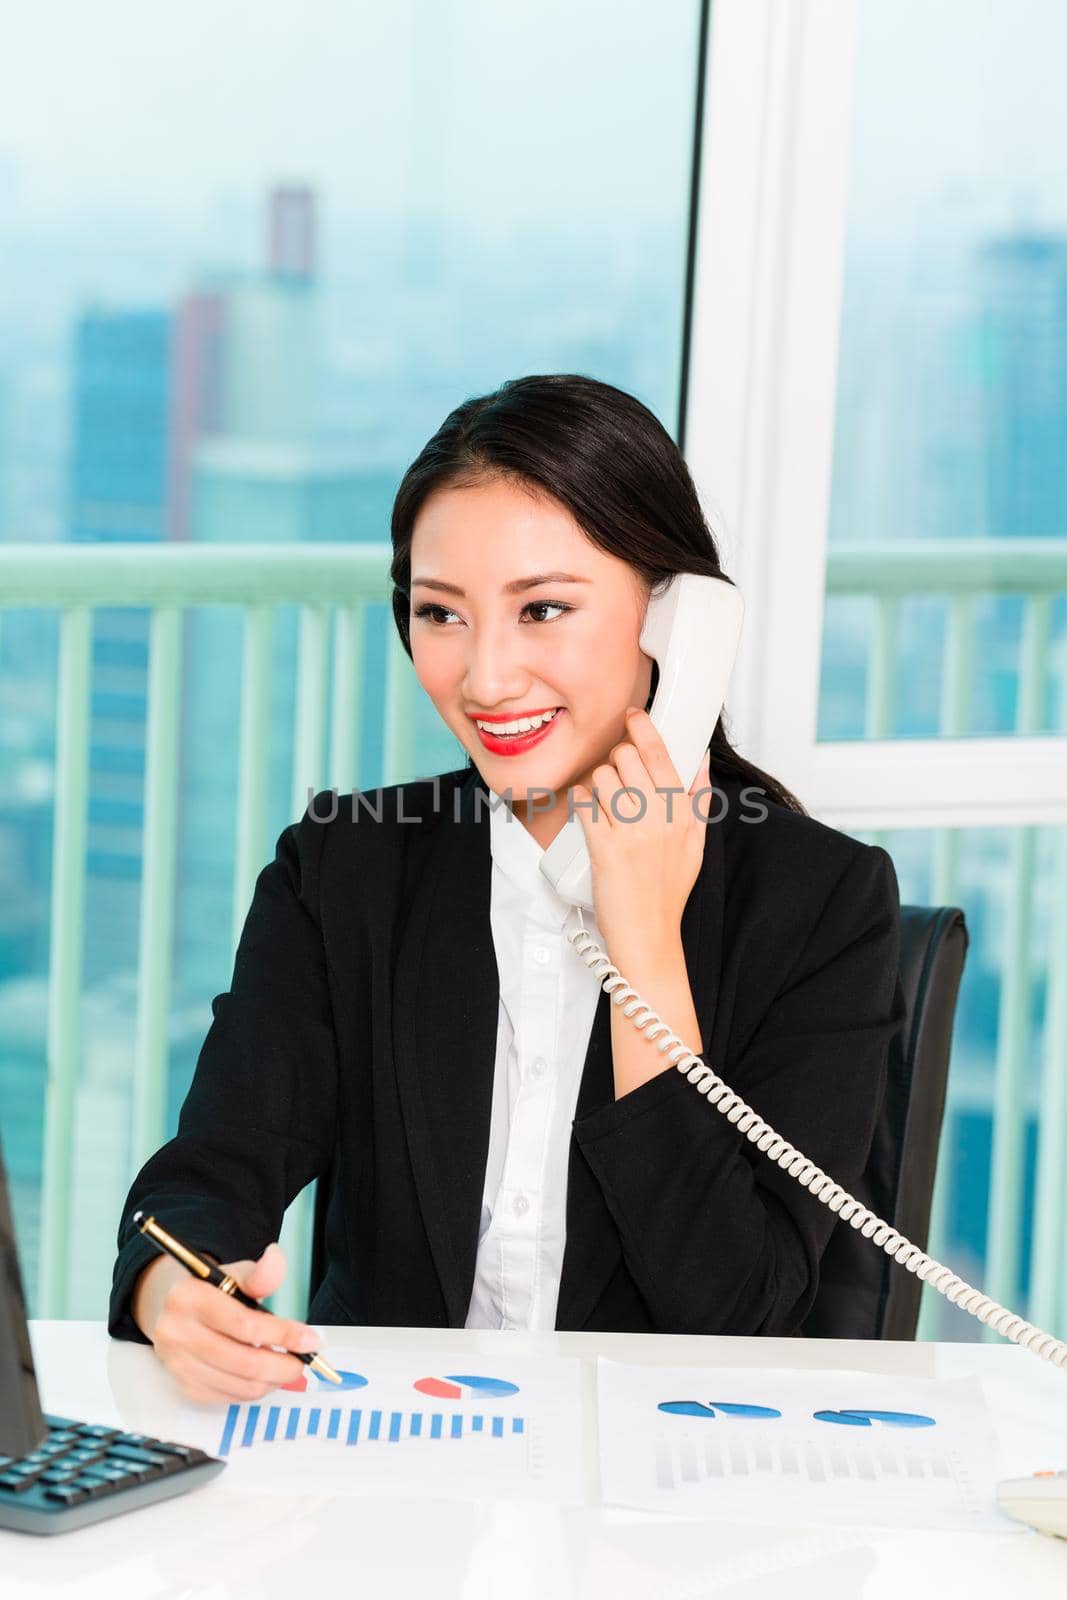 Young businesswoman talking on telephone with graph on desk in the office